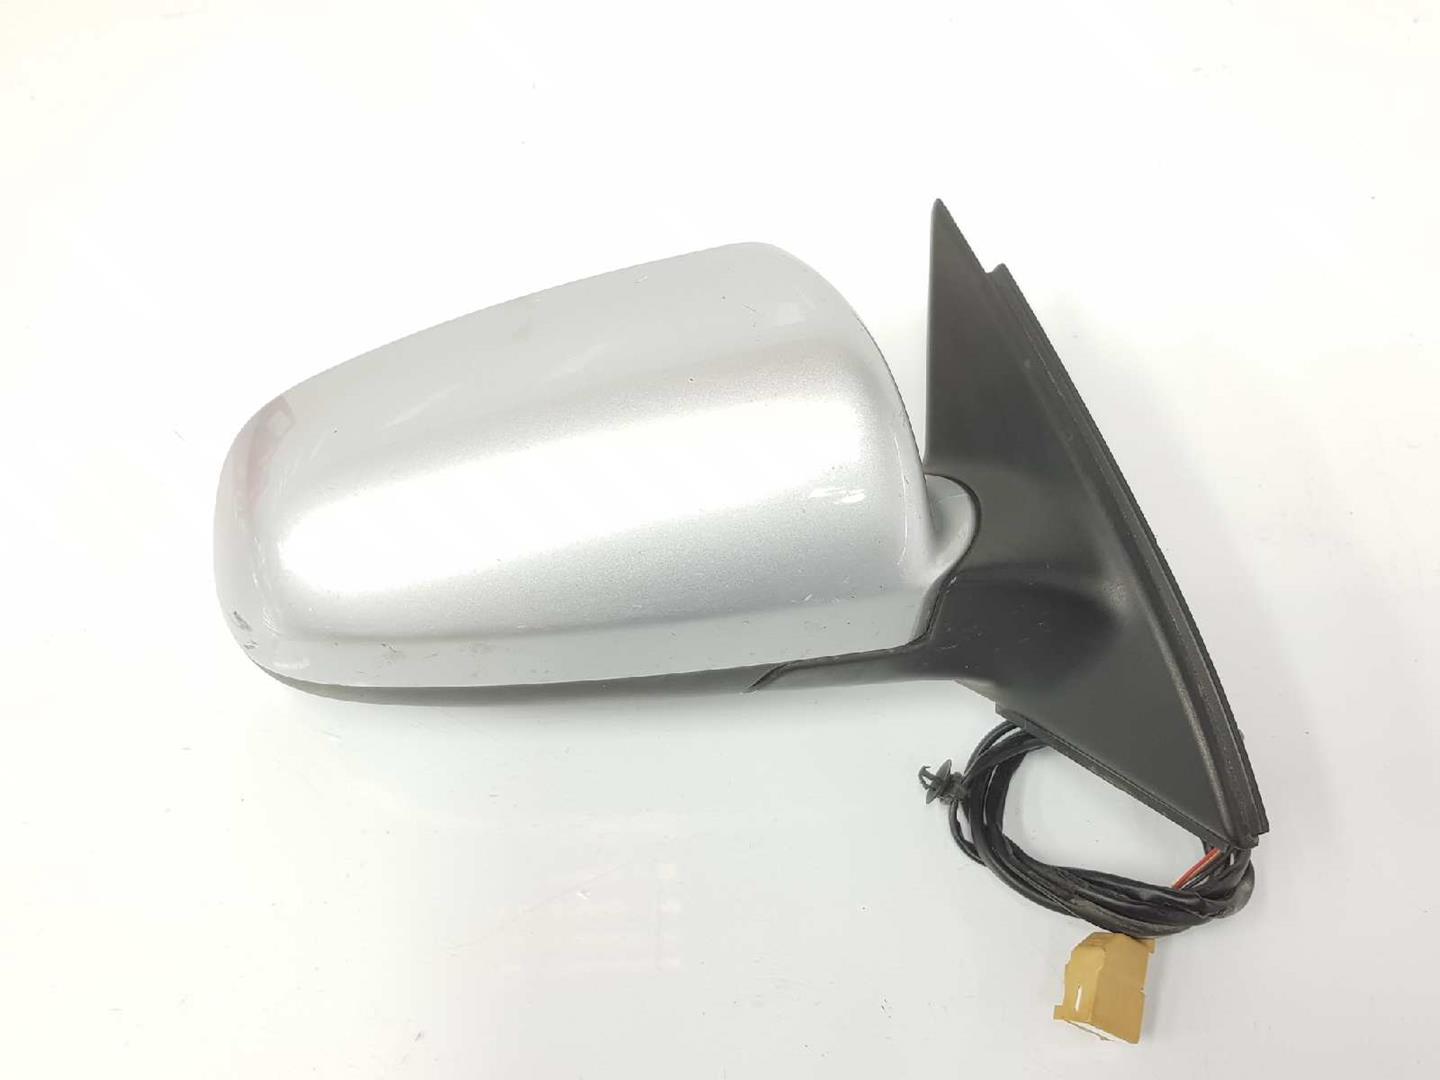 AUDI A4 B6/8E (2000-2005) Right Side Wing Mirror 8E1858531AA, NVE2311, GRIS5B/Y7W 19723436